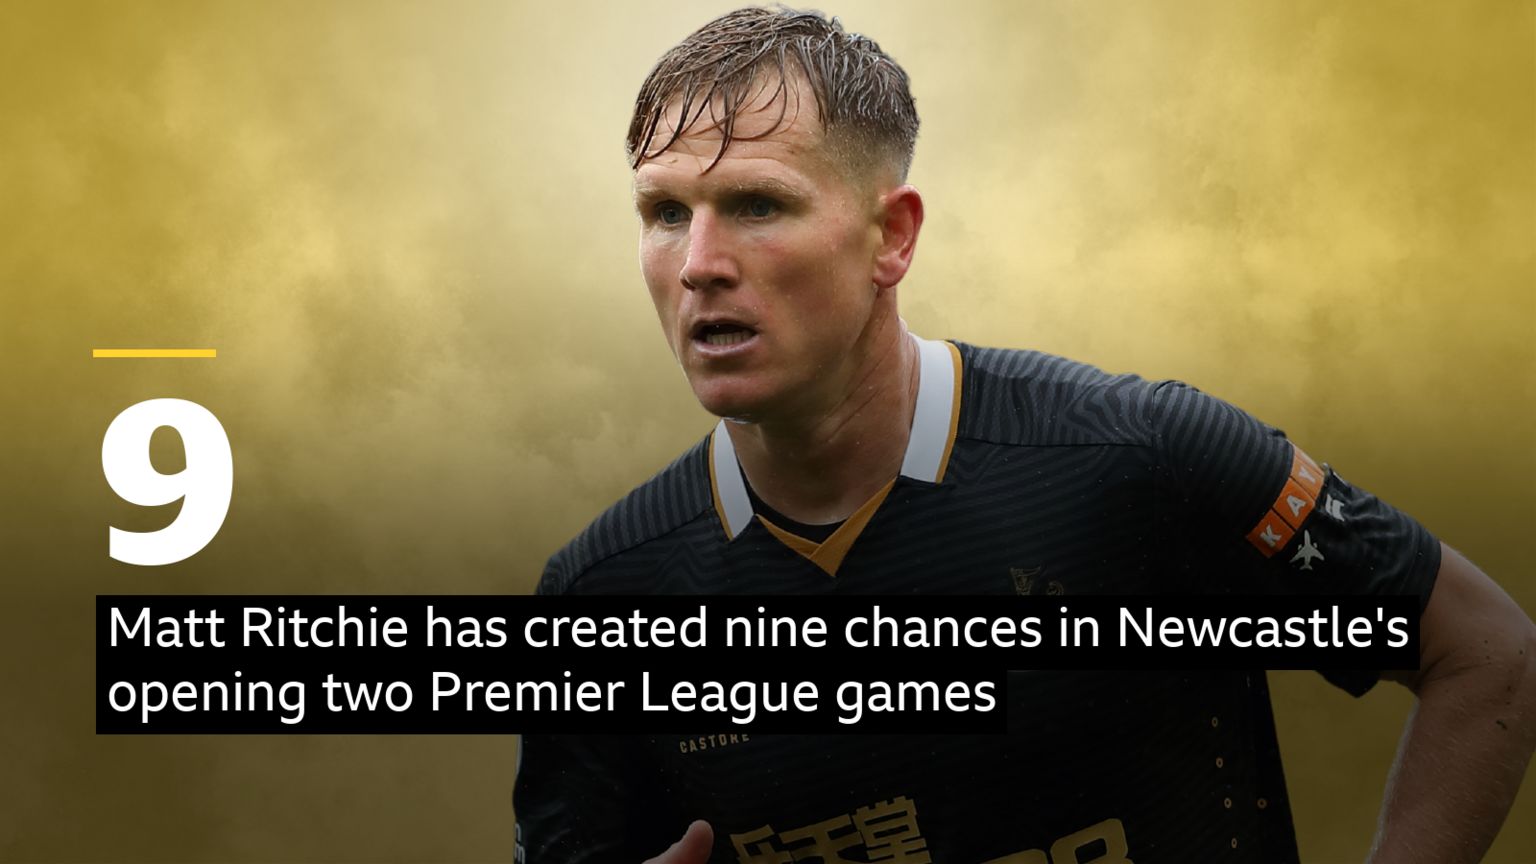 Matt Ritchie created nine chances for his team-mates in the opening two Premier League games